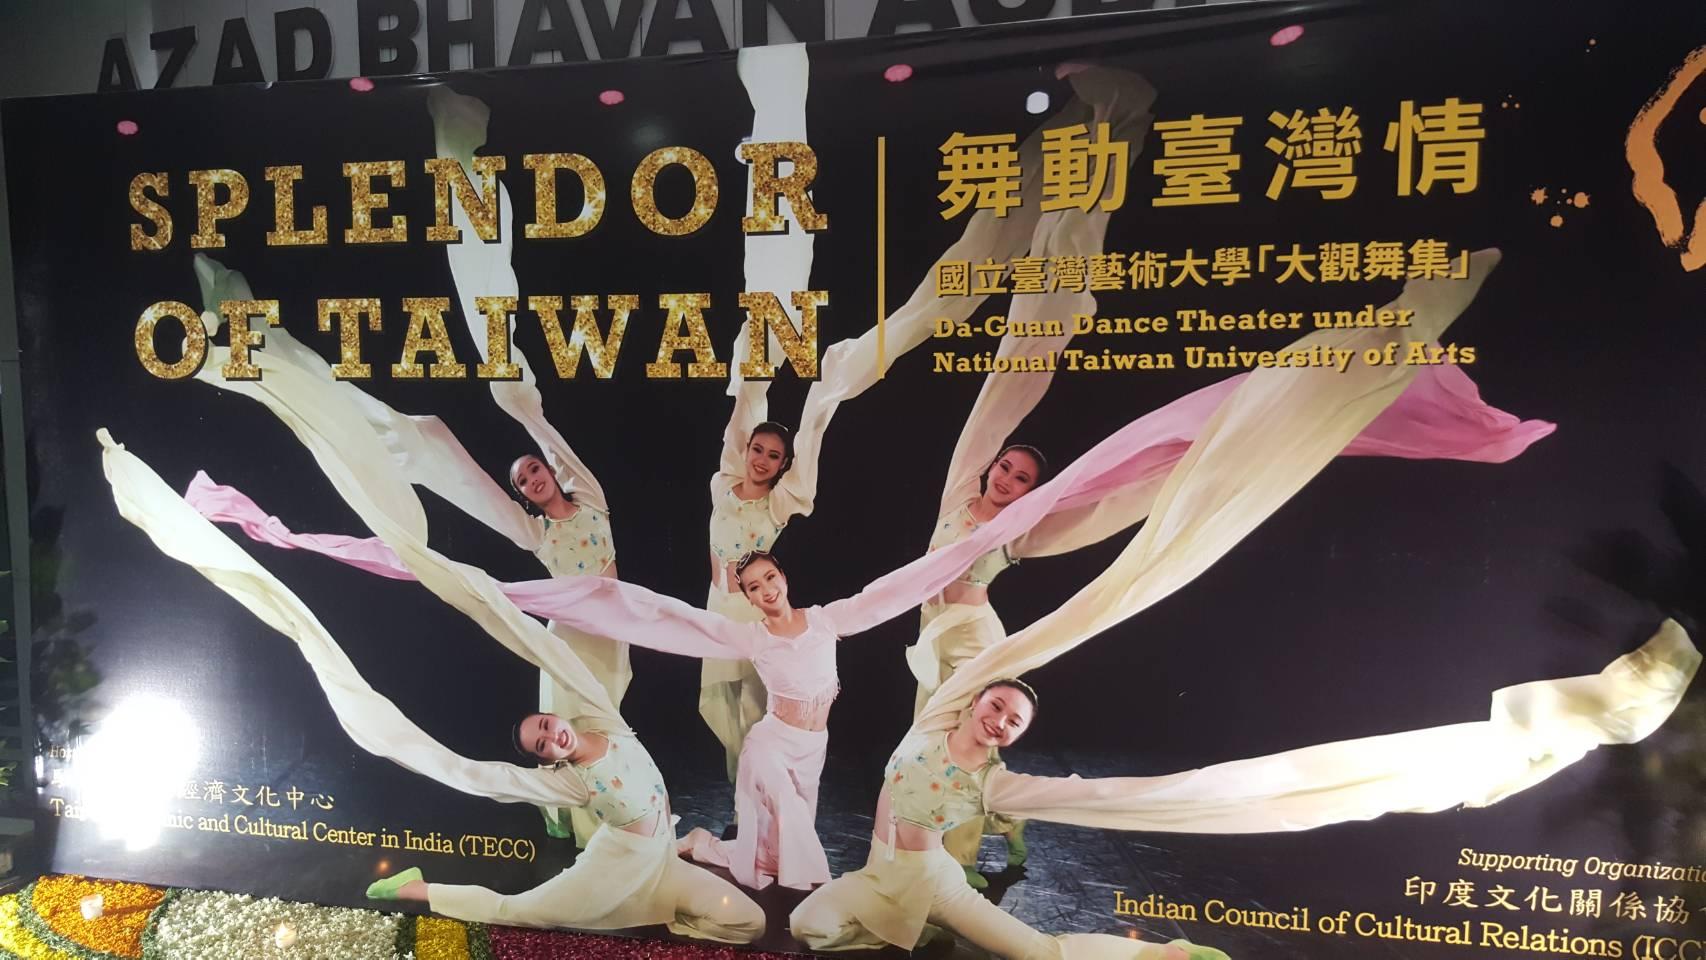 A standing board for ‘Splendor of Taiwan’ was displayed at the entrance of Azad Bhawan Auditorium, ICCR July 23, 2017.